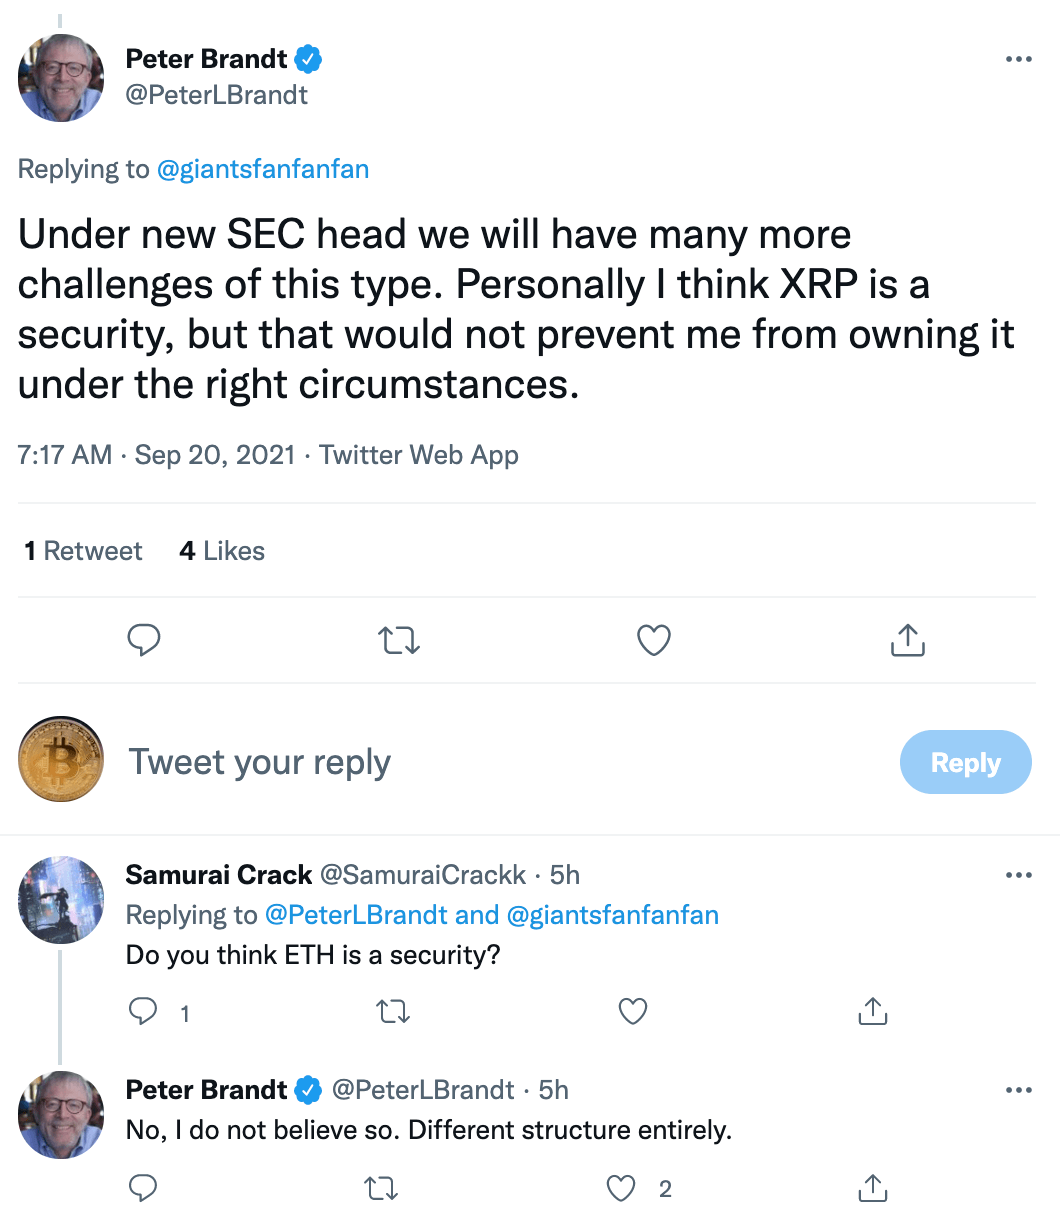 xrp-is-unregistered-security-but-eth-is-not-peter-brandt-said